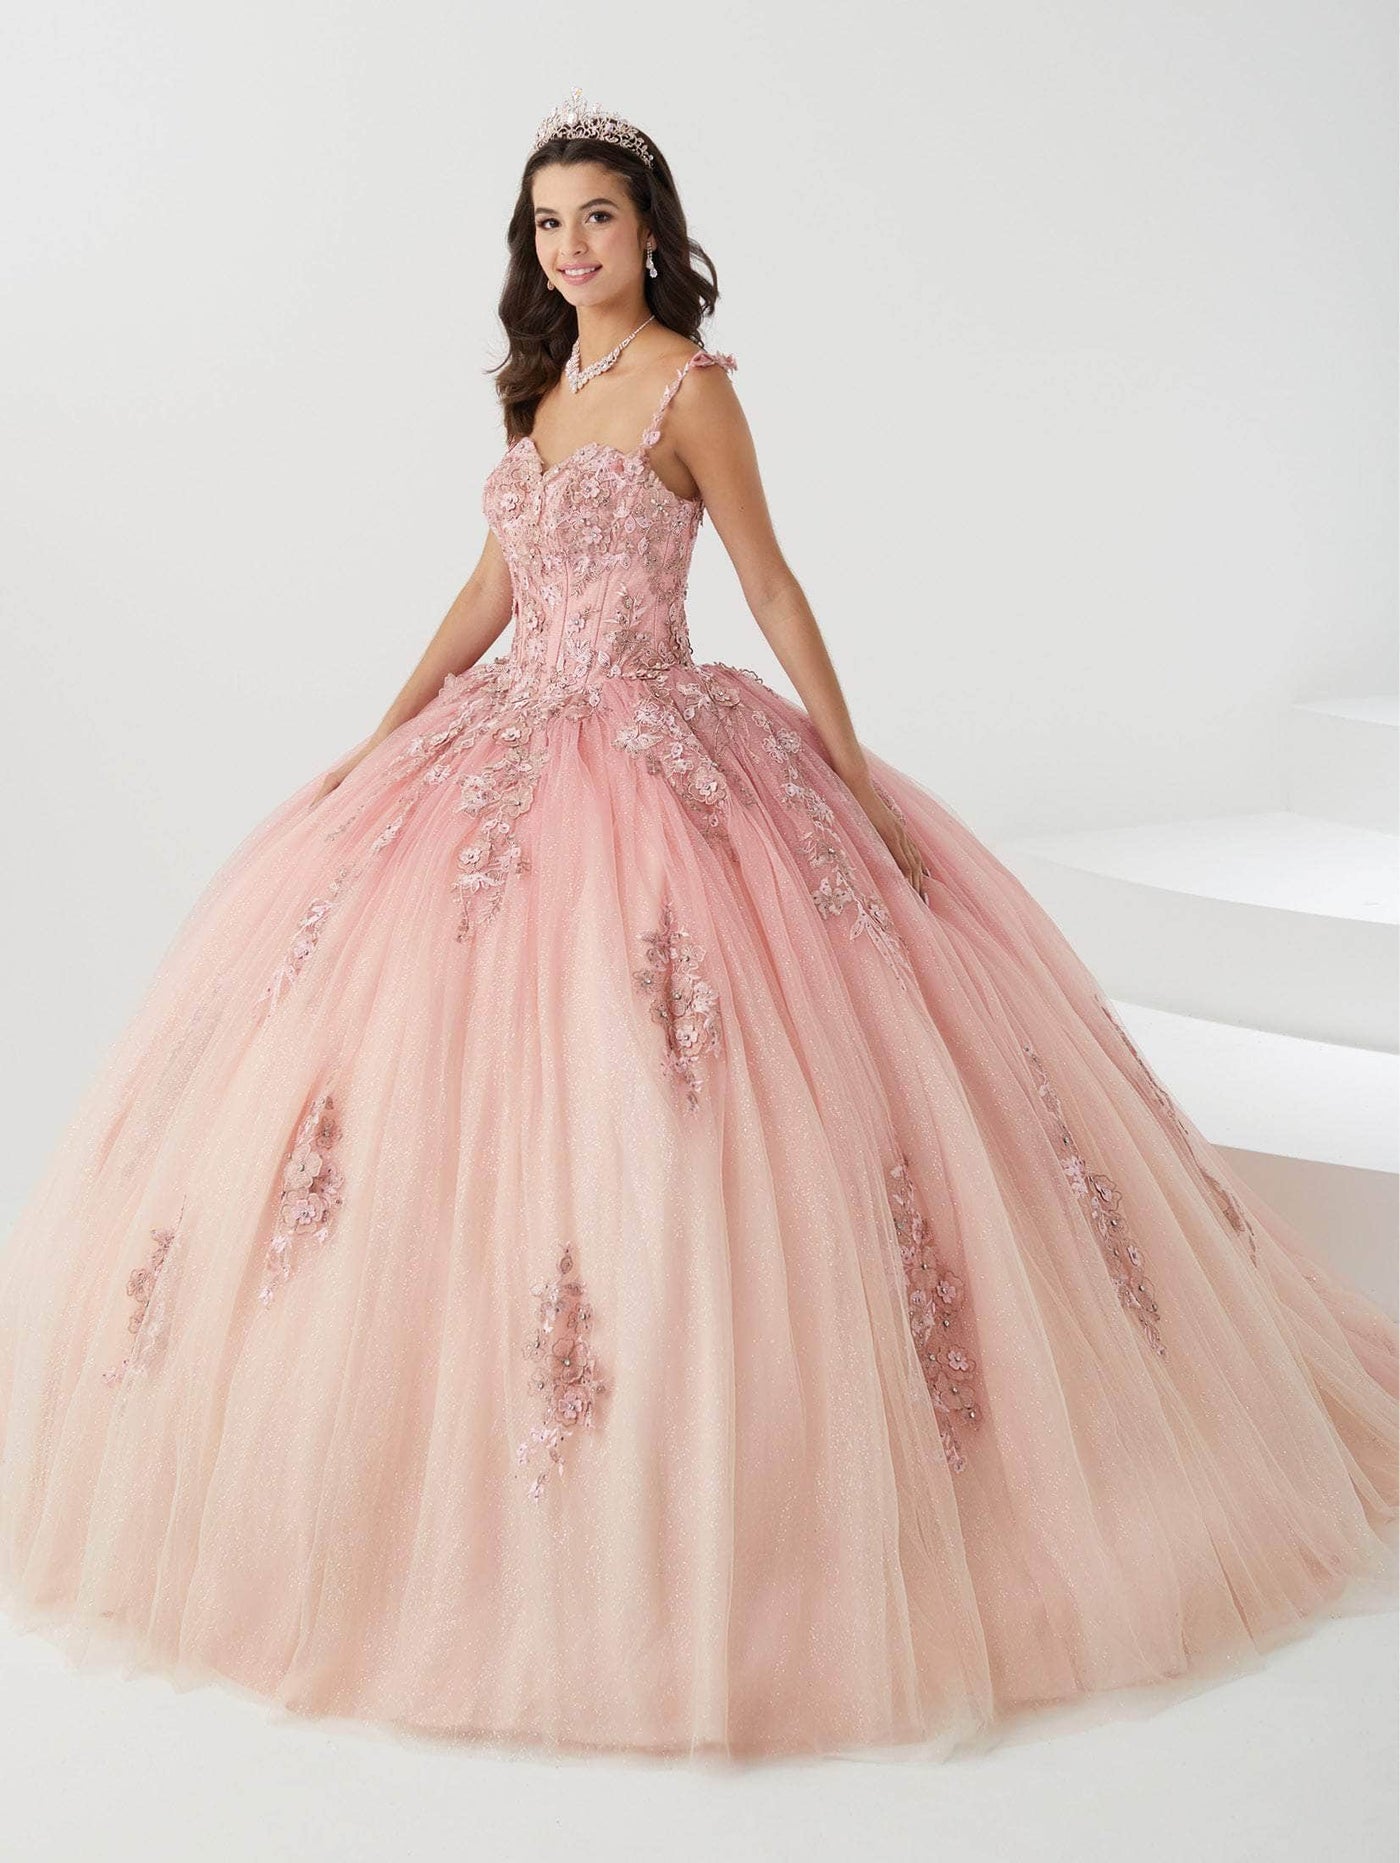 Fiesta Gowns 56470 - Corseted Floral Princess Ballgown Special Occasion Dress